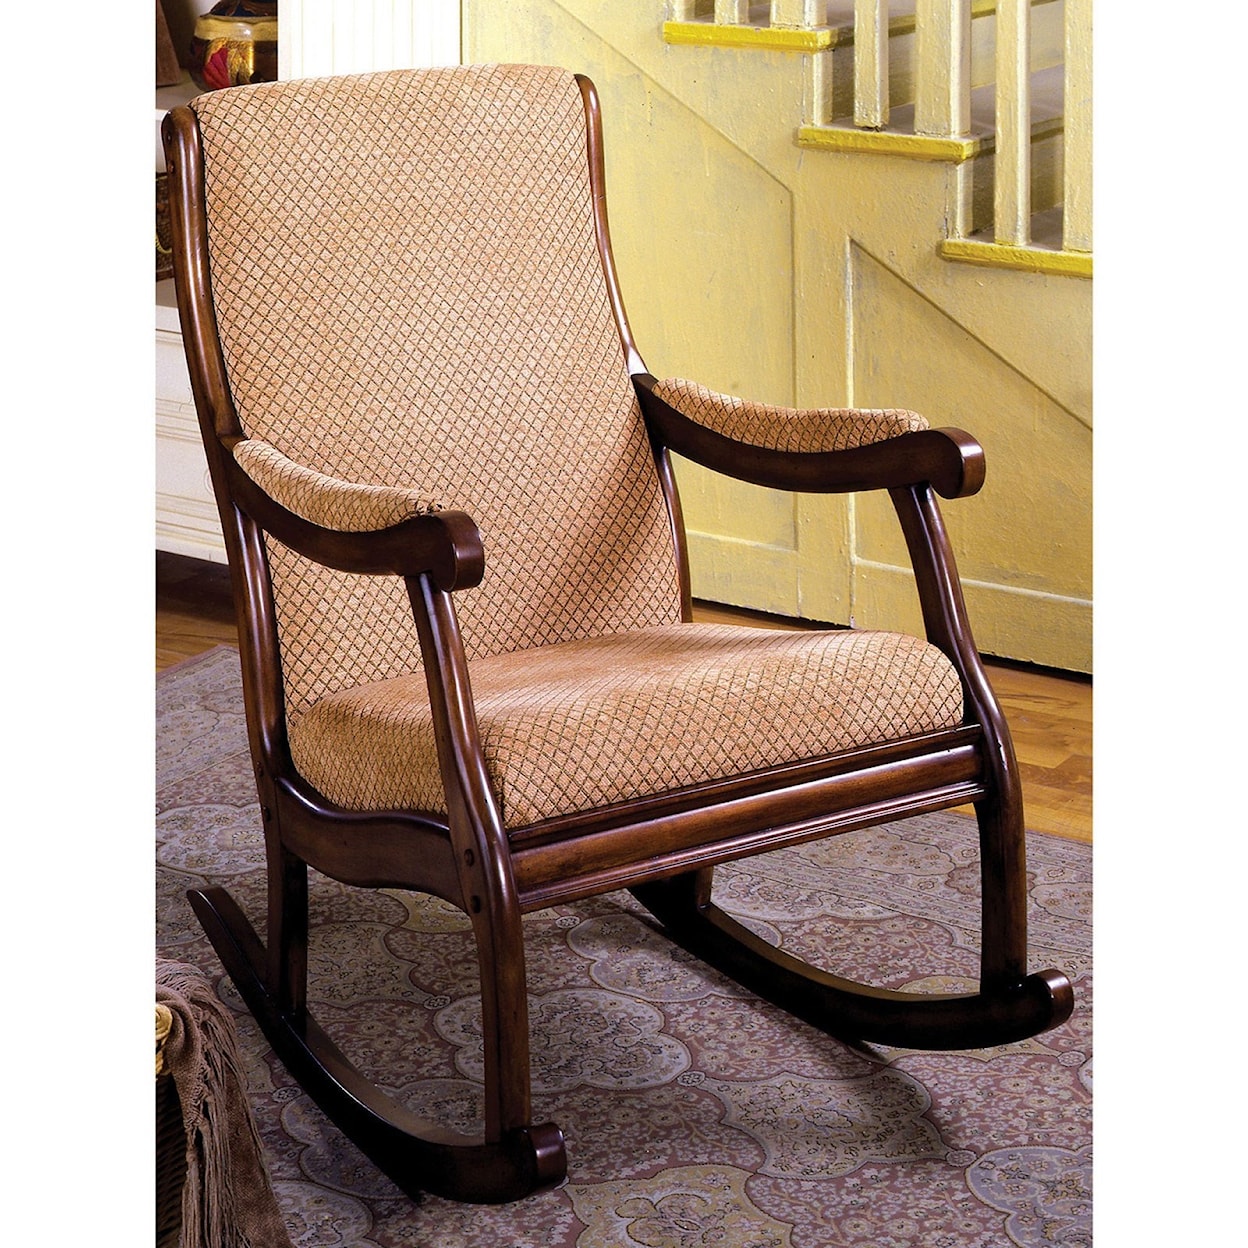 Furniture of America Liverpool Rocking Chair